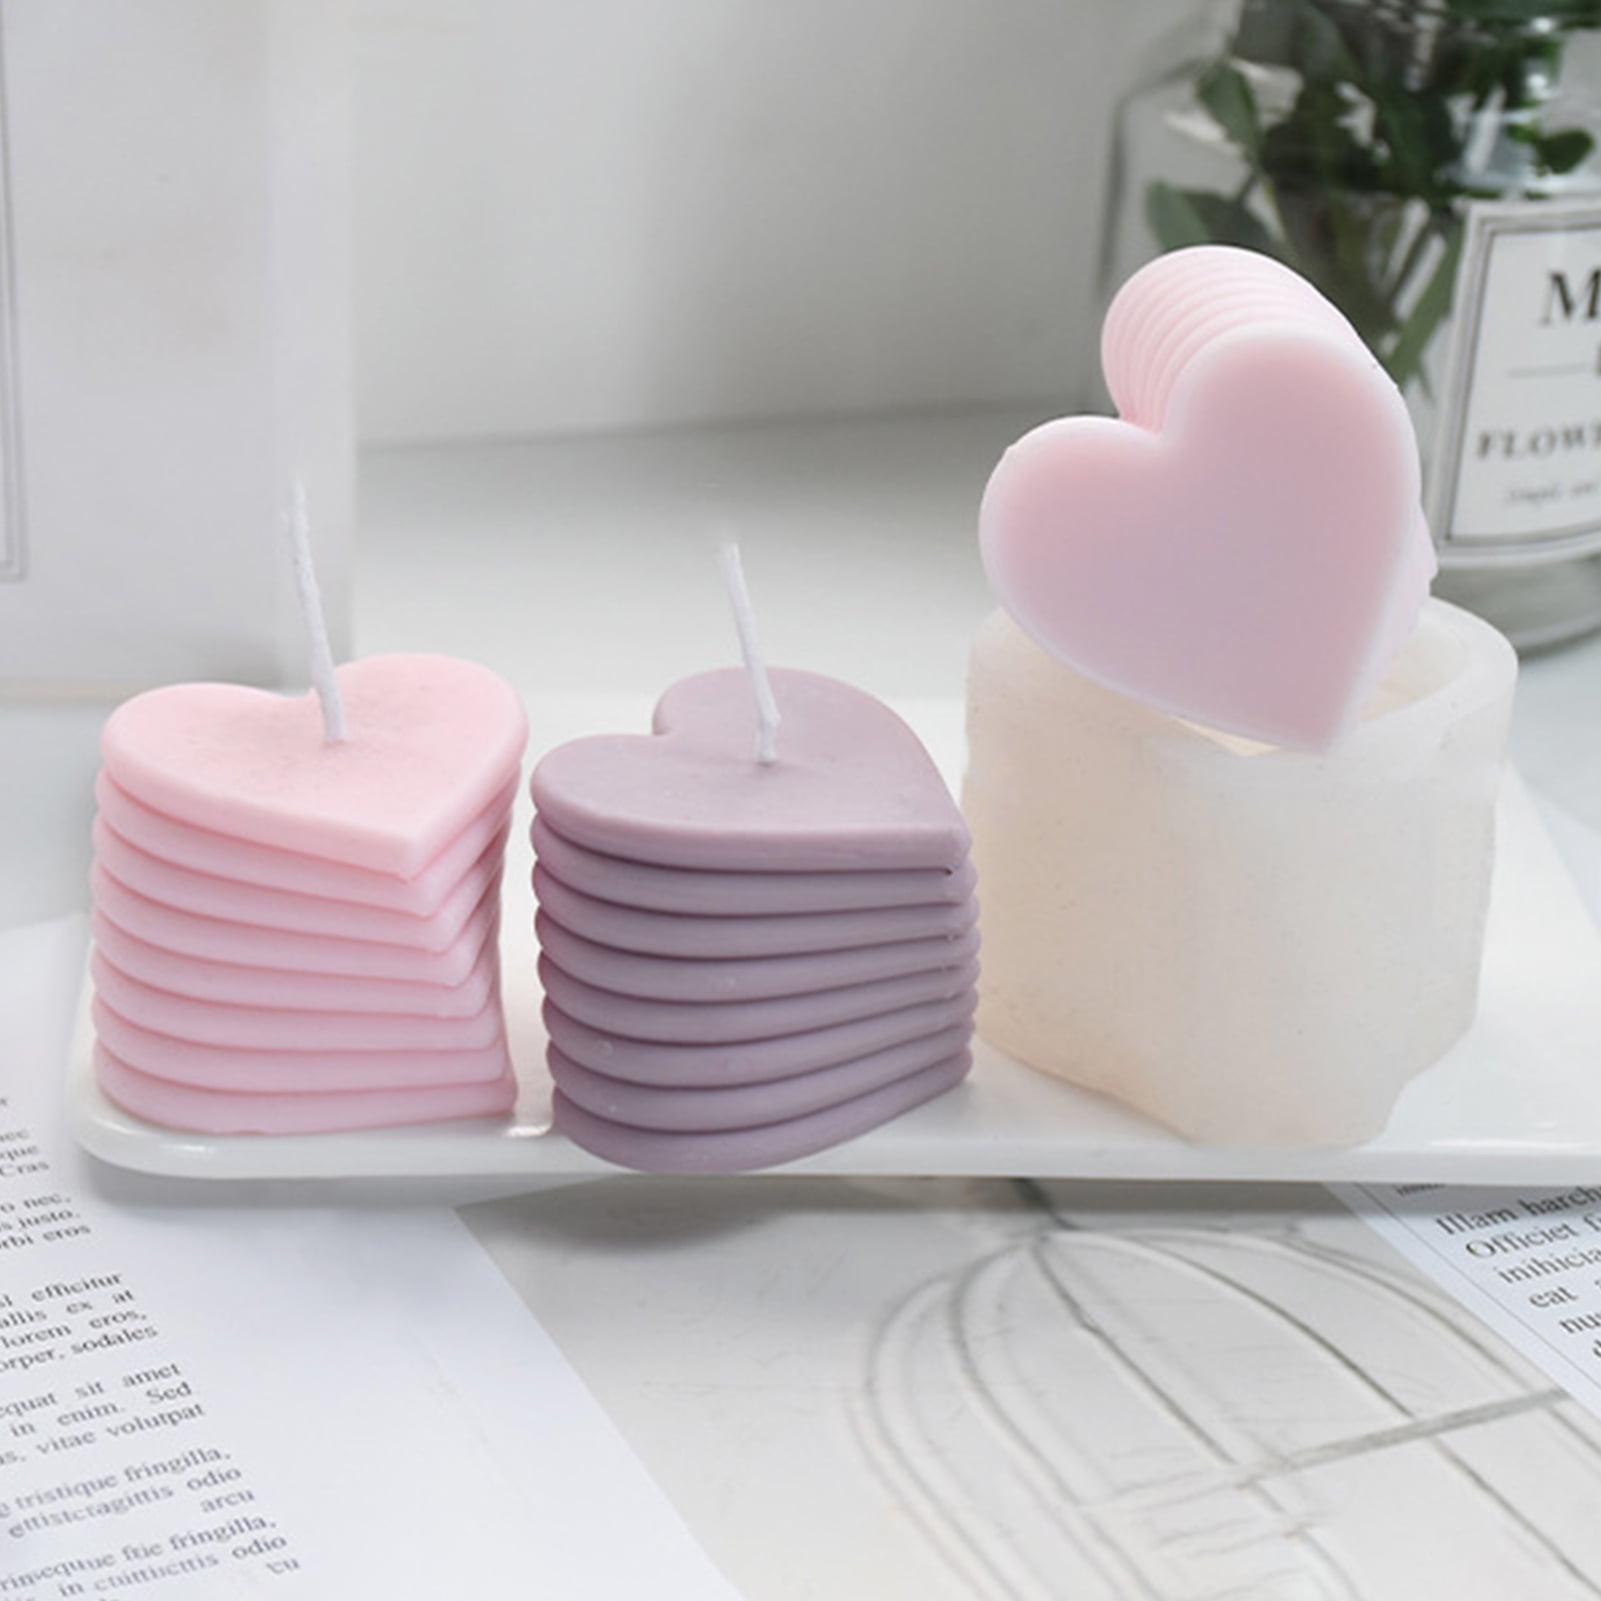 3D Rotating Love Candle Mold Stacking Heart-shaped Aromatic : kpopita